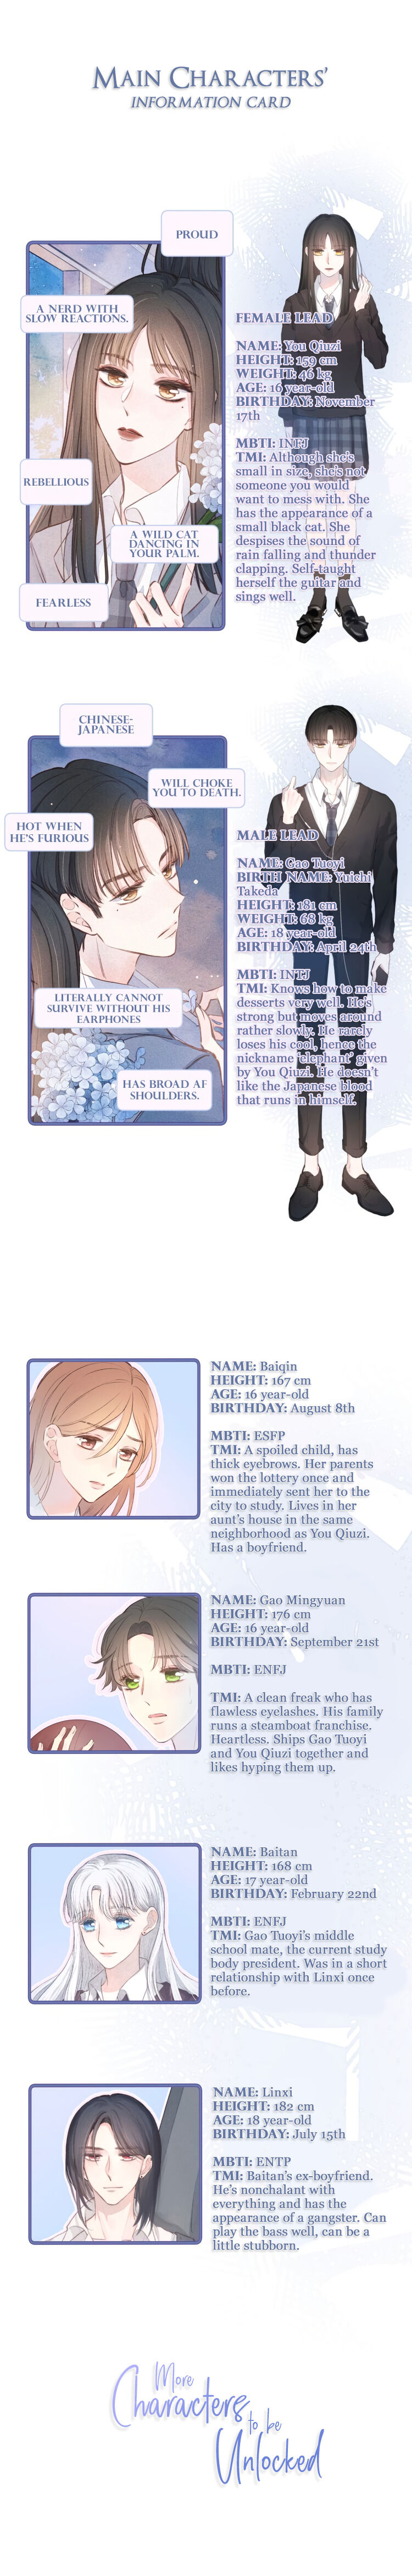 Hydrangea Melancholy Chapter 0.5 - Character Profile - Picture 1